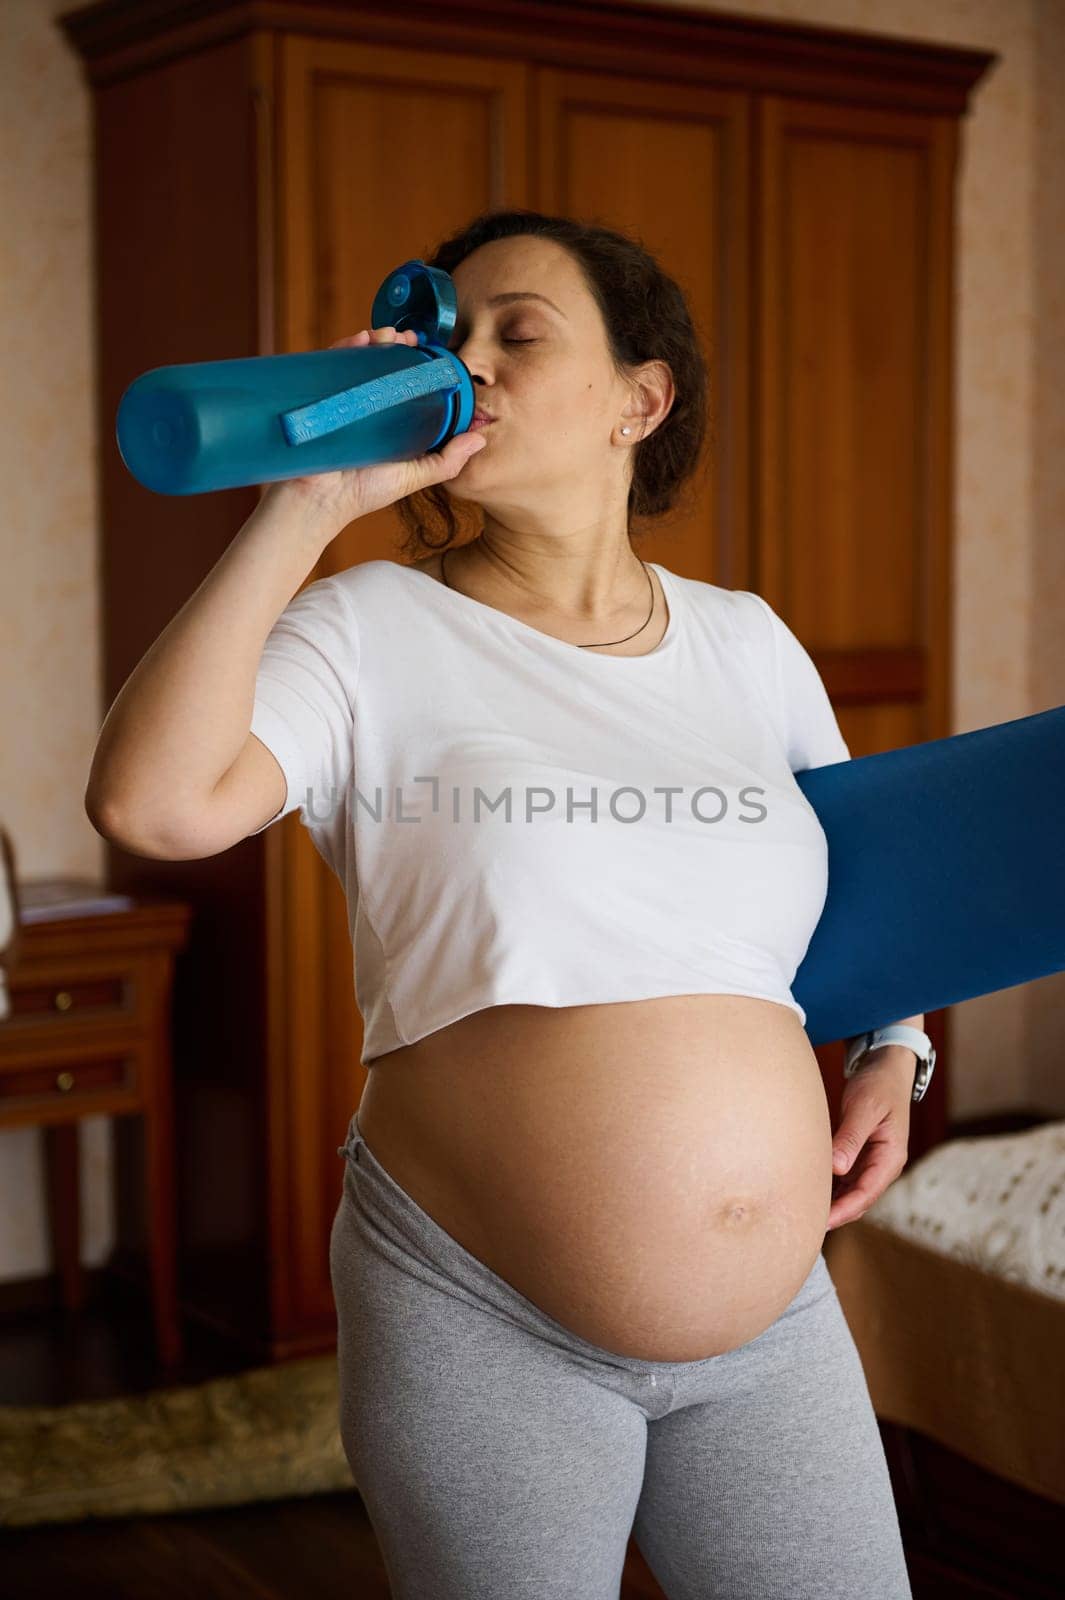 Pregnant woman drinks water, renewing aqua balance after workout, holding yoga mat, enjoying active healthy lifestyle by artgf